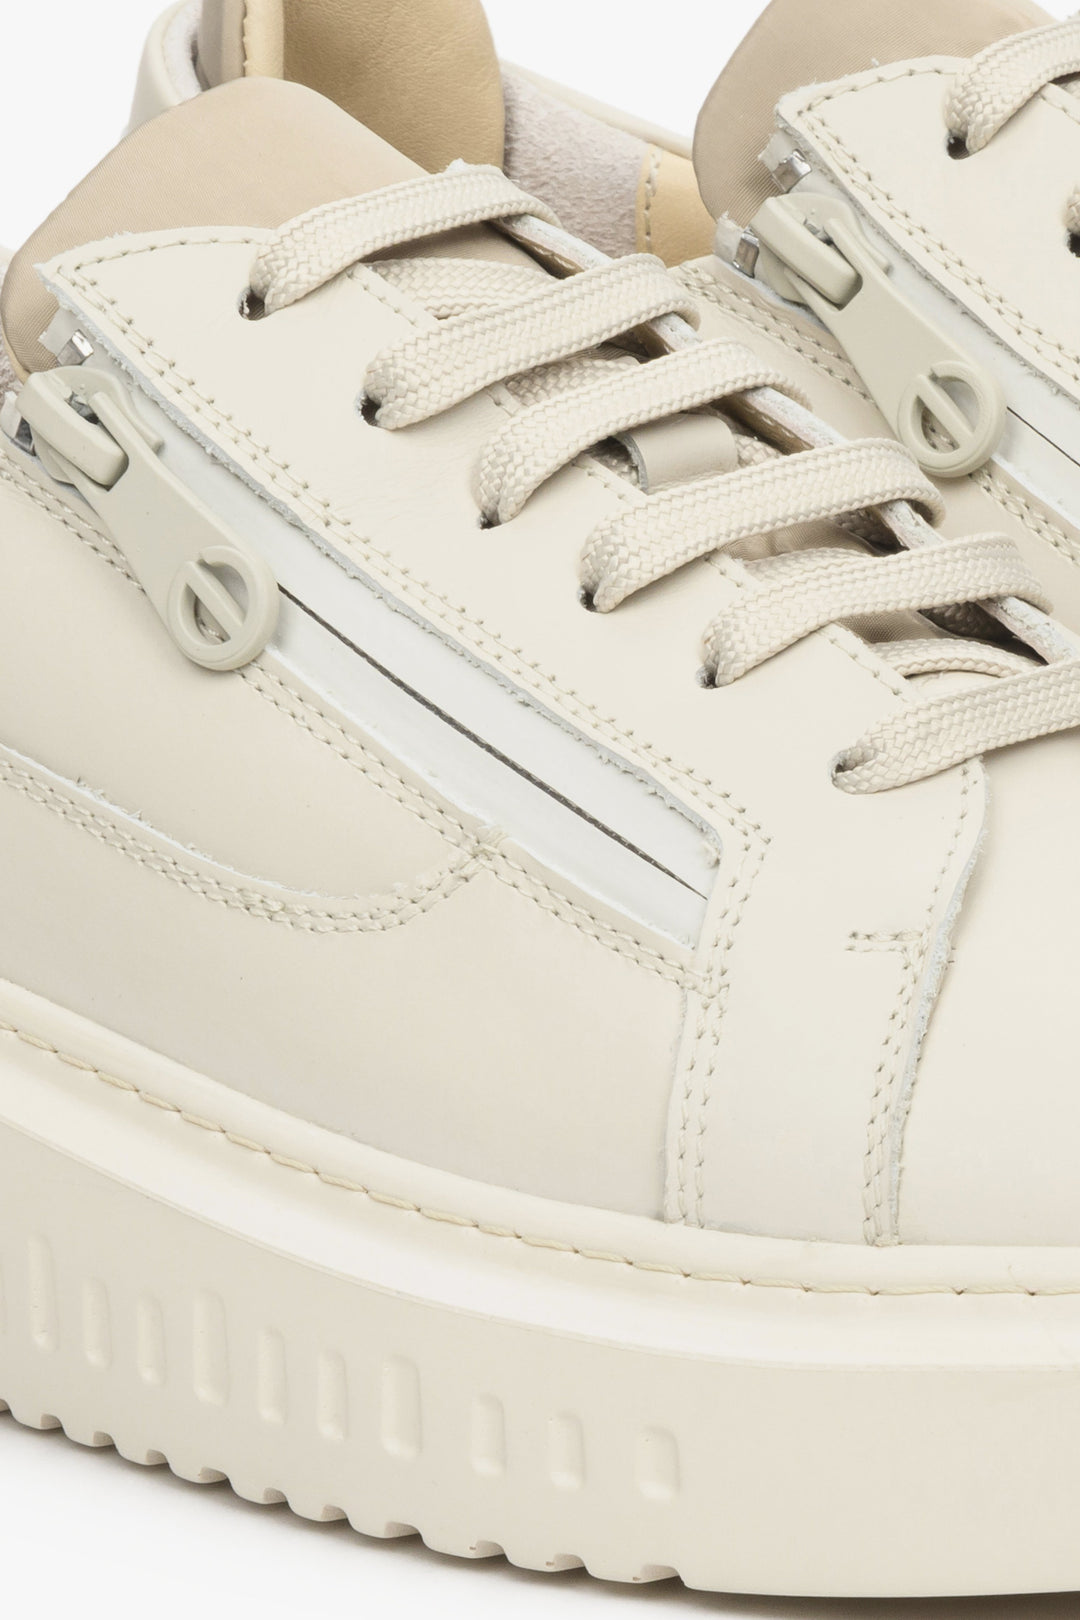 Leather, women's beige sneakers by Estro with a flexible sole - close-up of the details.